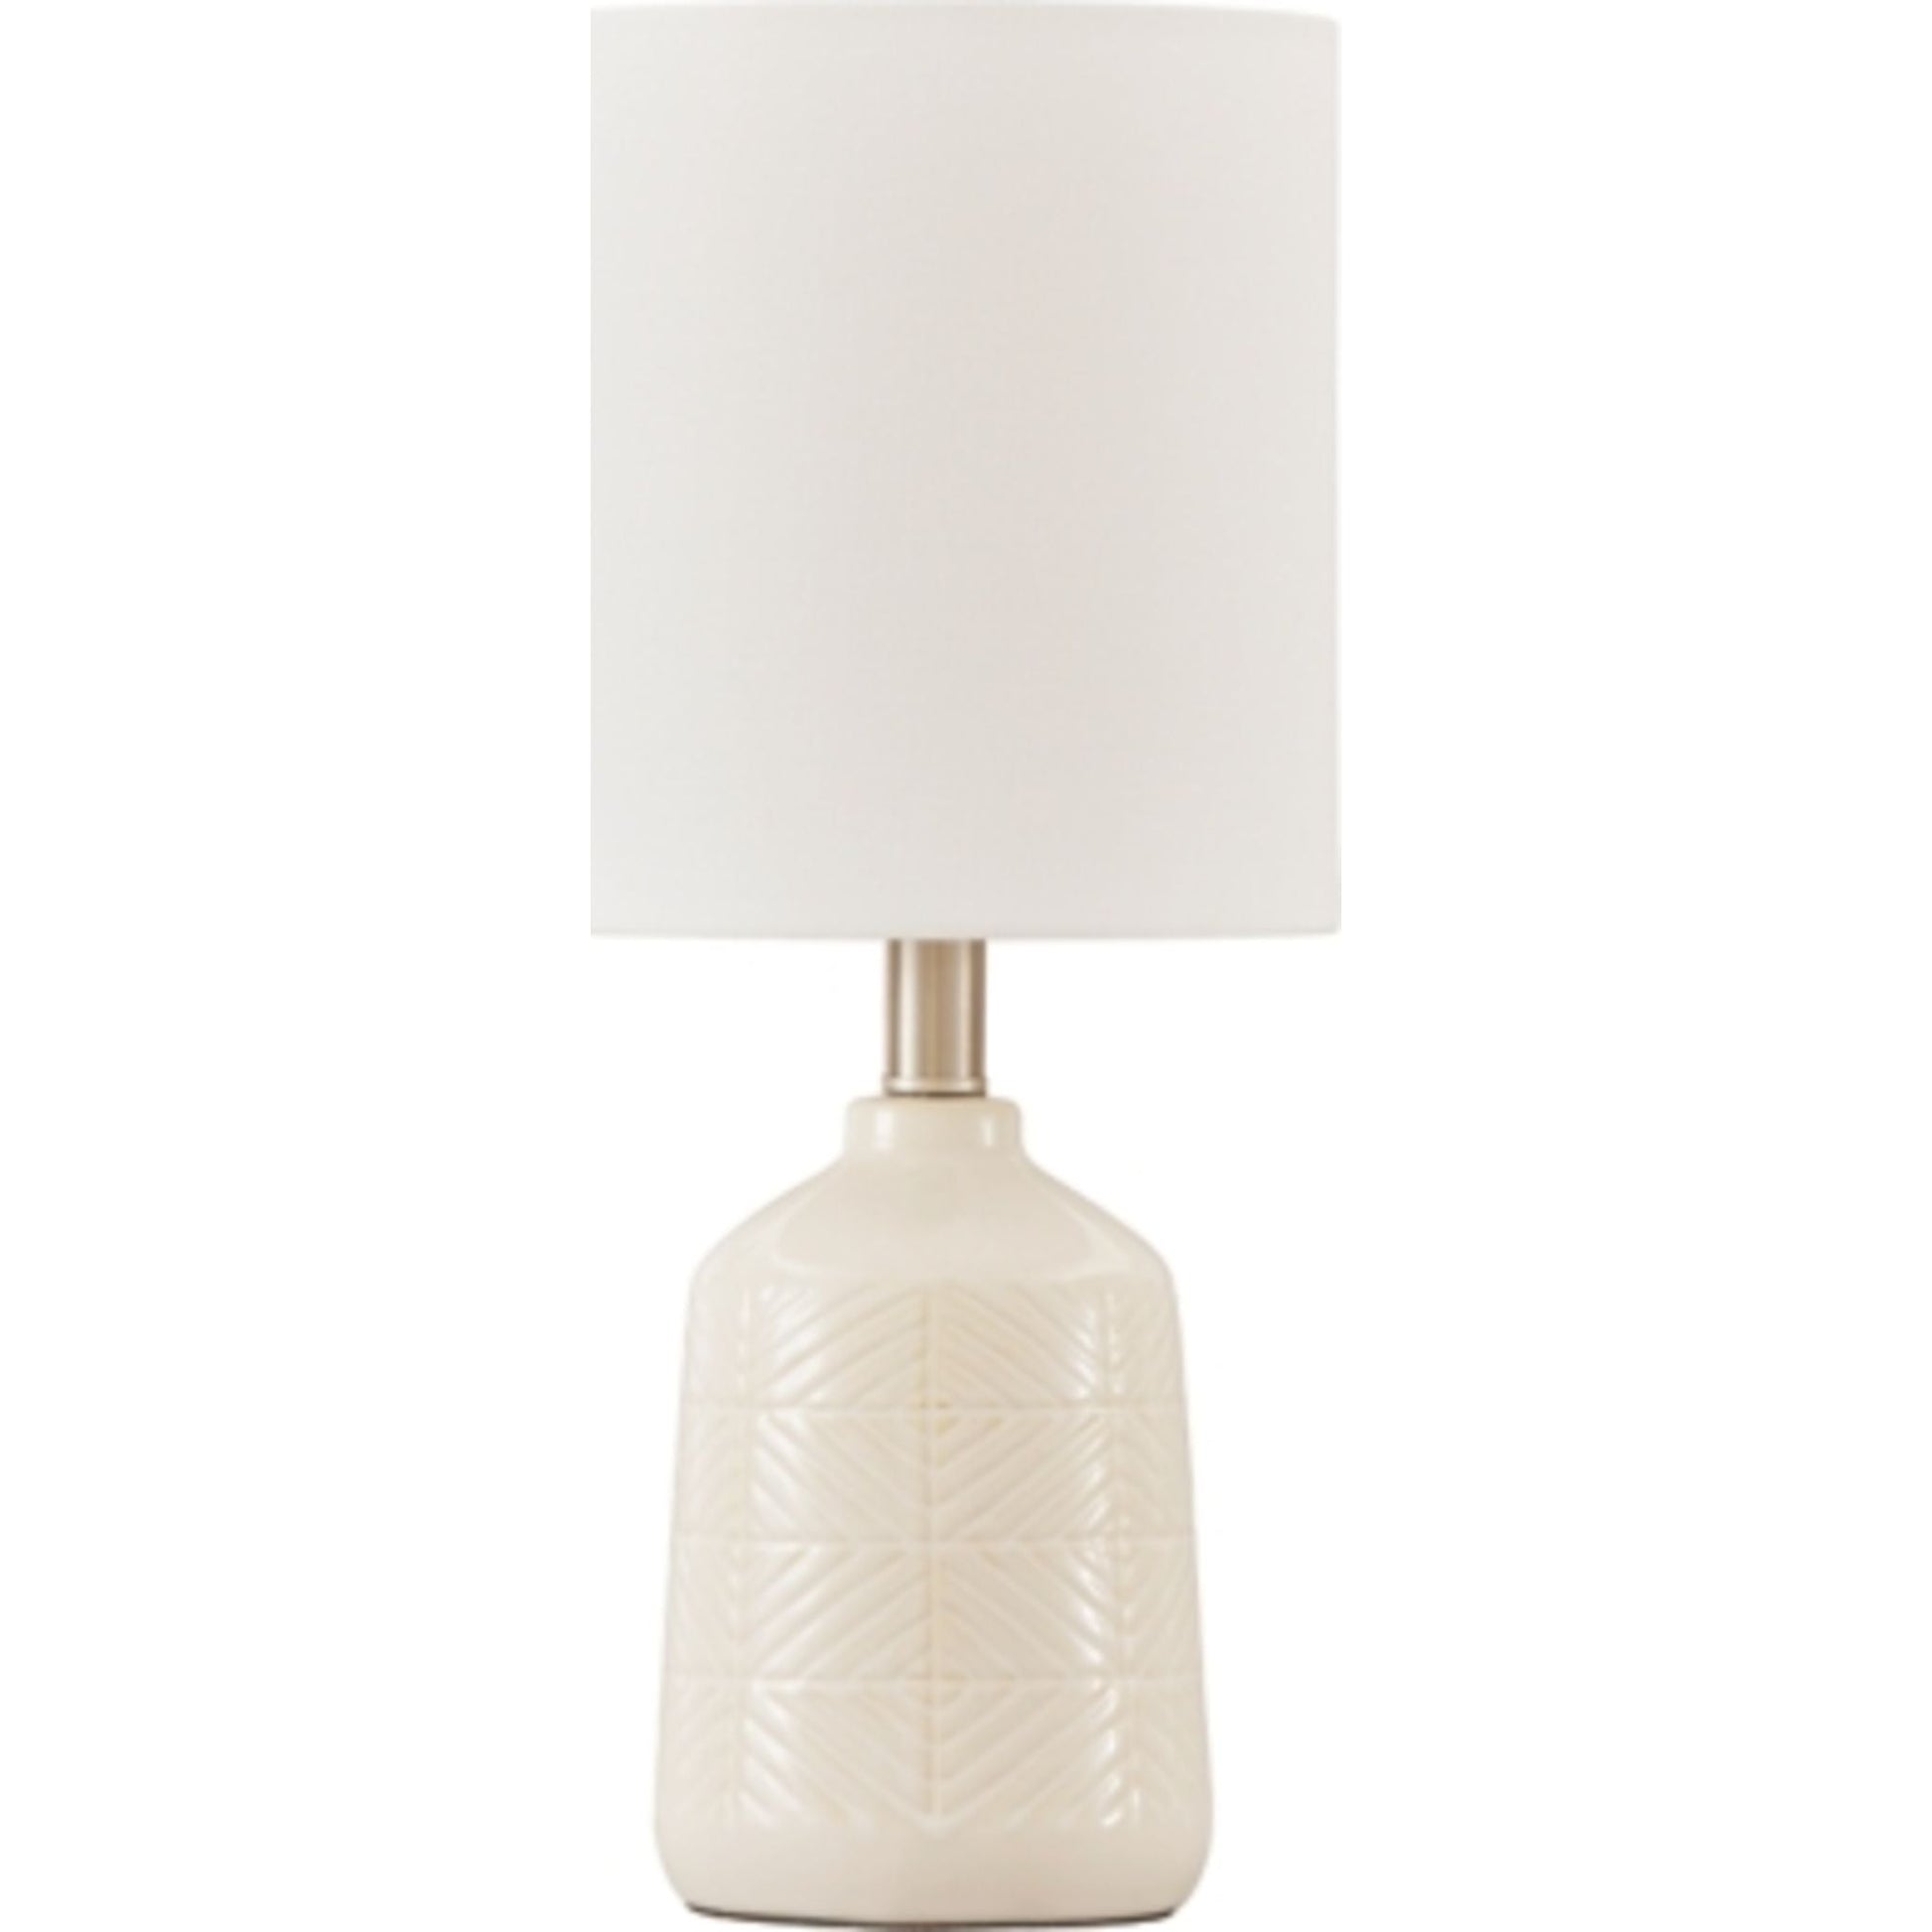 Brodewell Table Lamp 18.13"